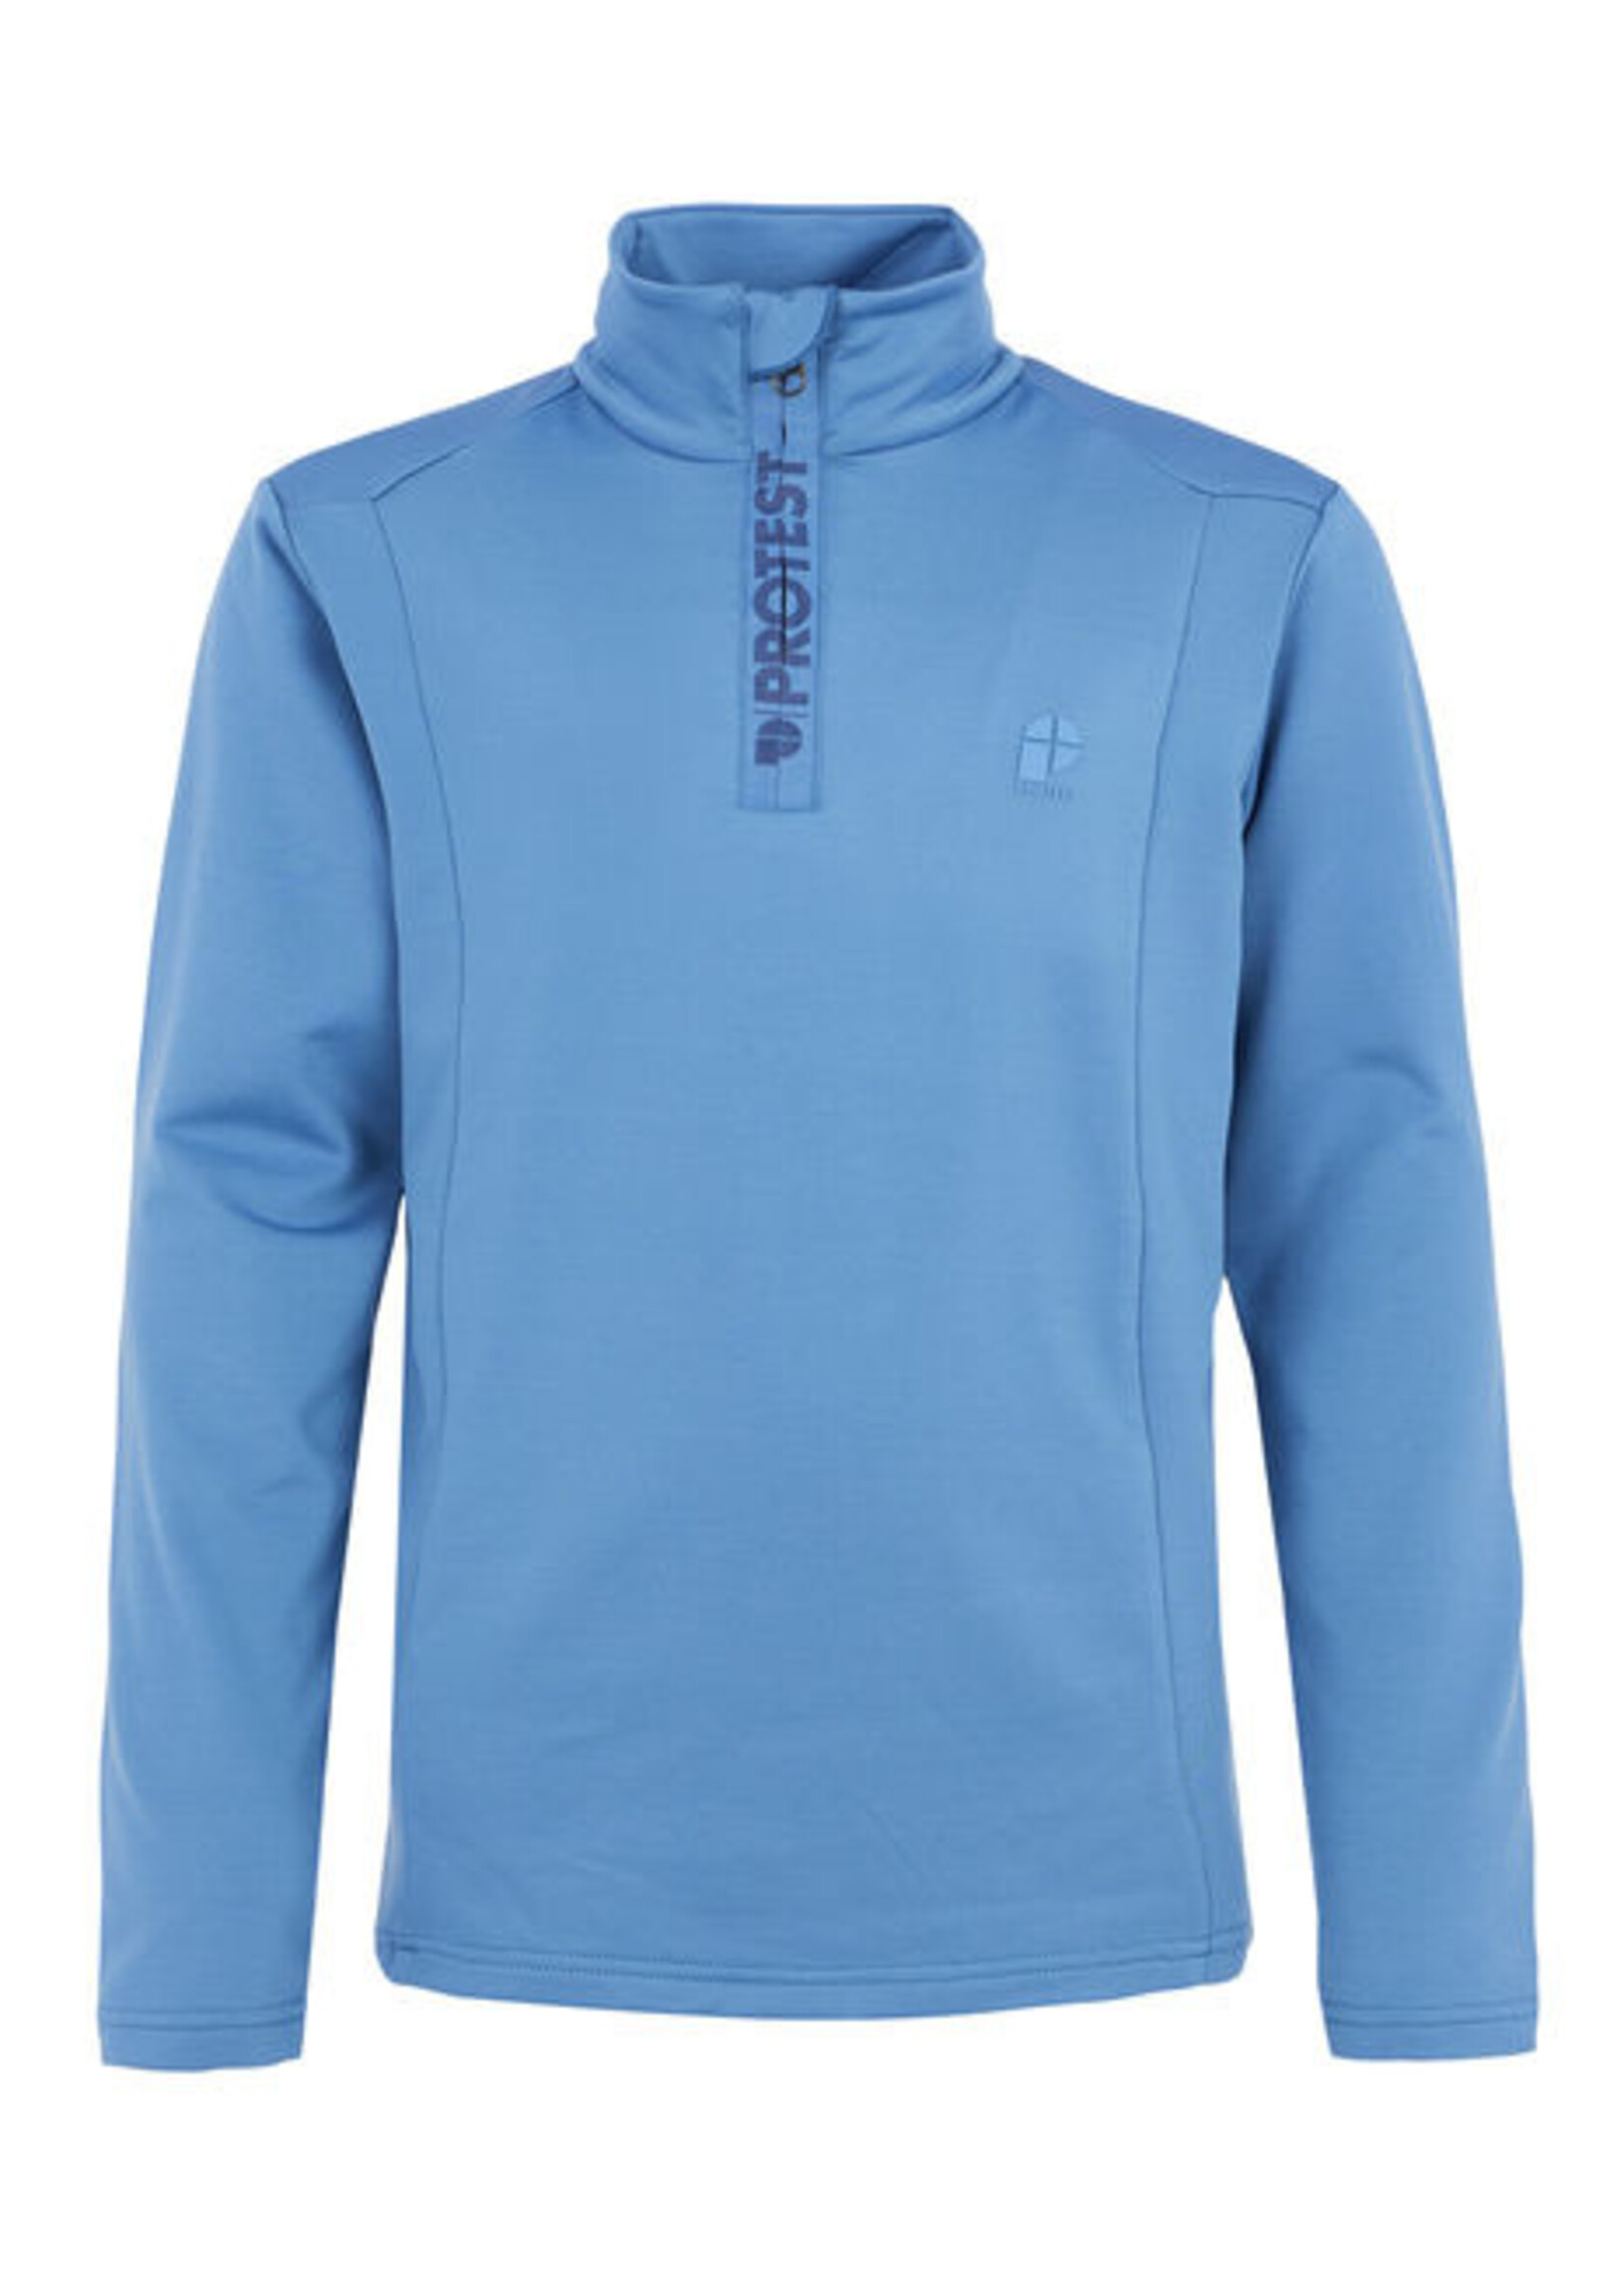 PROTEST  WILLOWY JR 1/4 zip top-Blue Nights